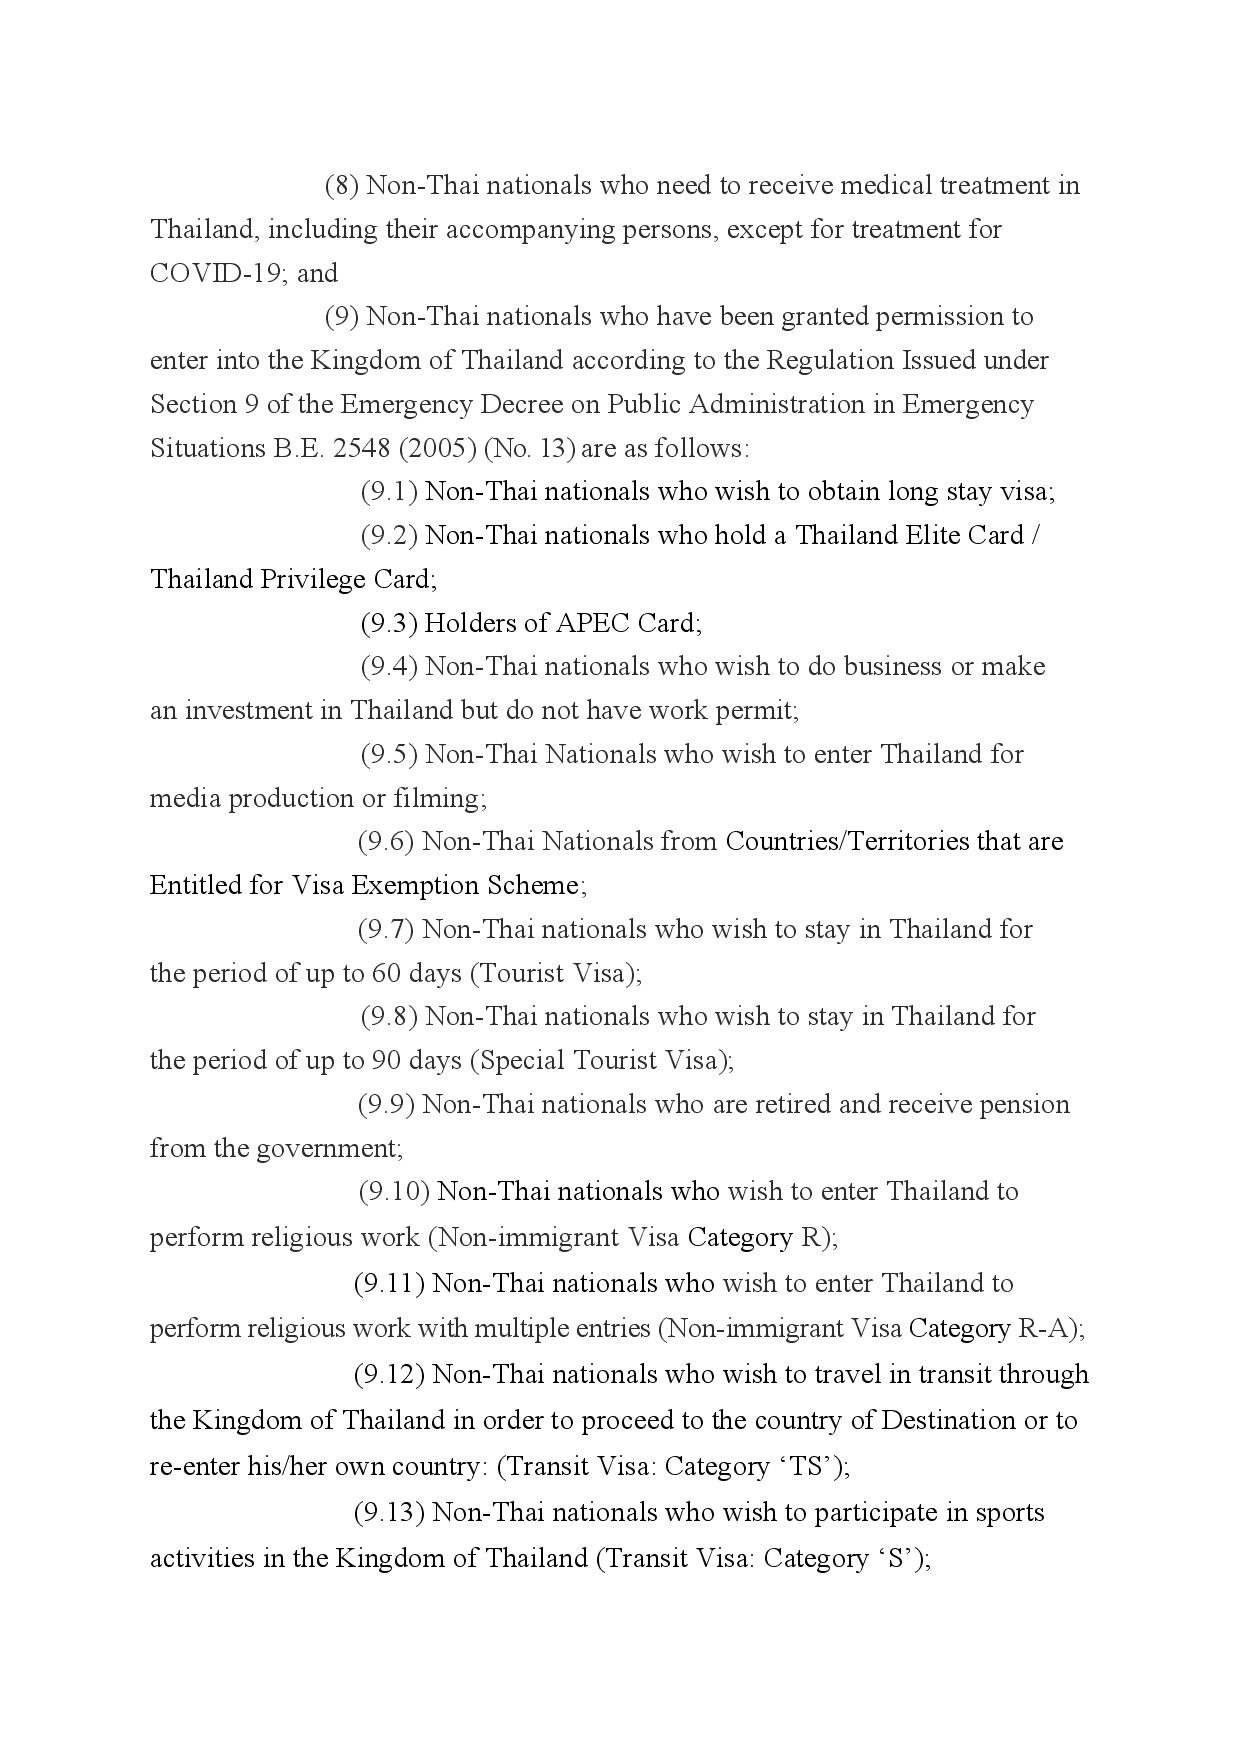 RTE_s_Announcement_on_Updated_Entry_Procedures_for_Non-Thais_No4_(by_Menaka)-page-006